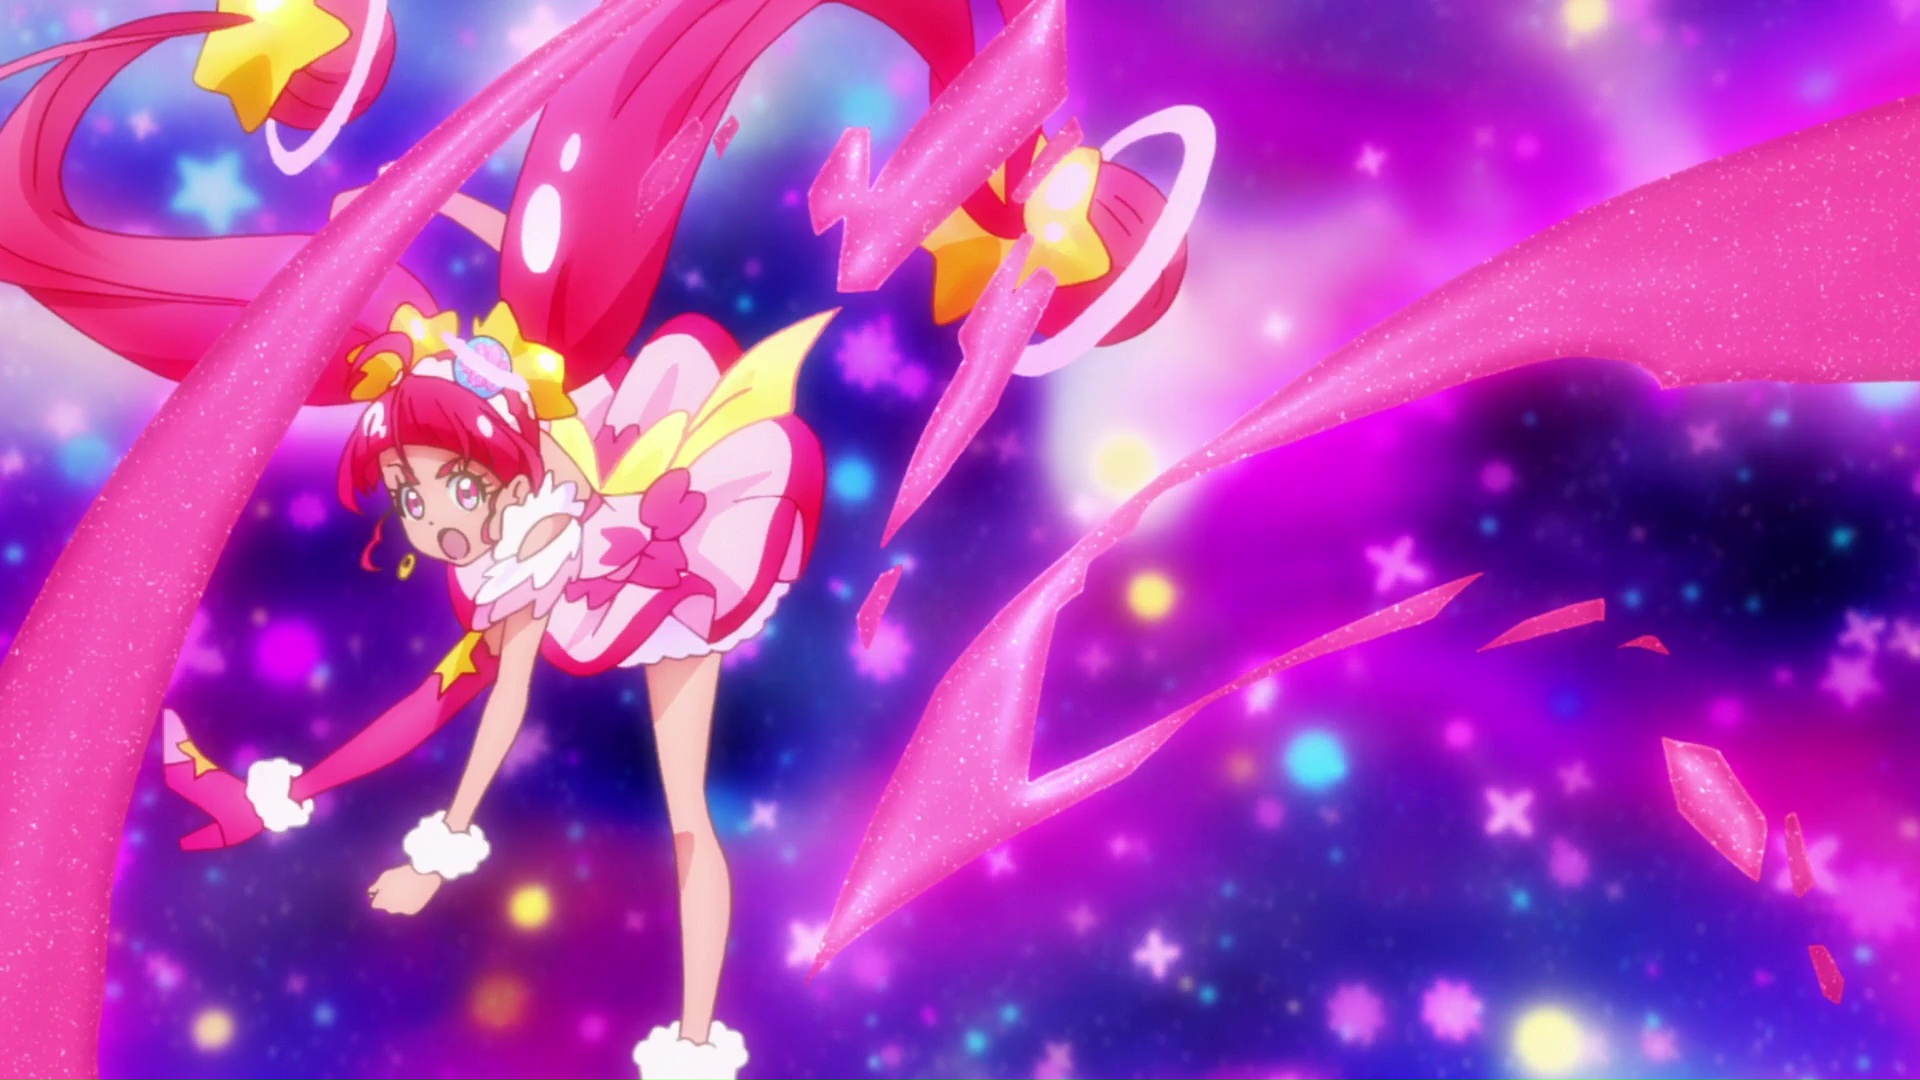 Pretty Cure Pamflets - Precure Star Punch! Episode 01